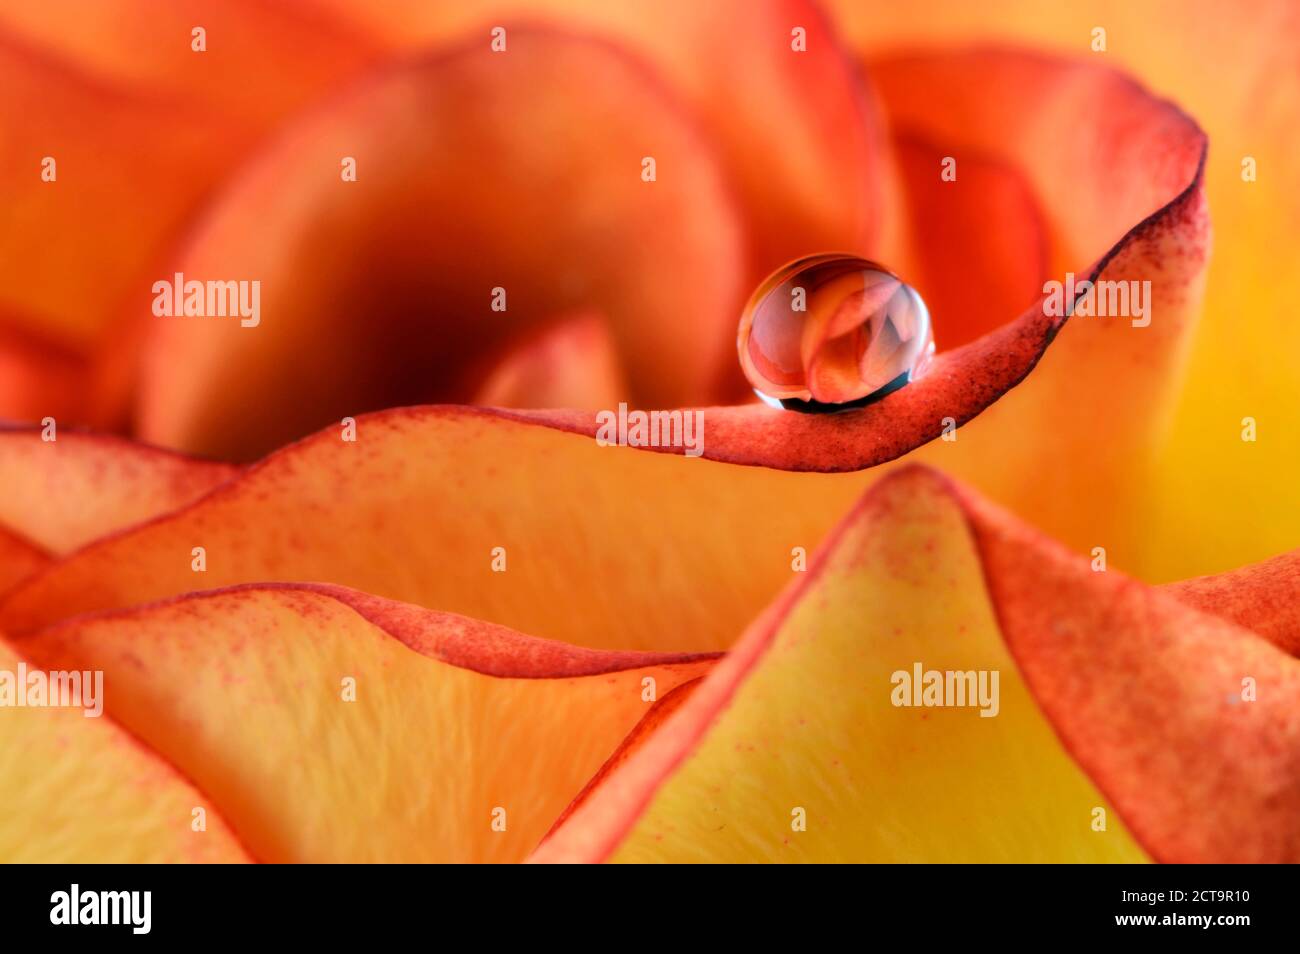 Water drop with reflection on petal of orange rose, Rosa, close-up Stock Photo